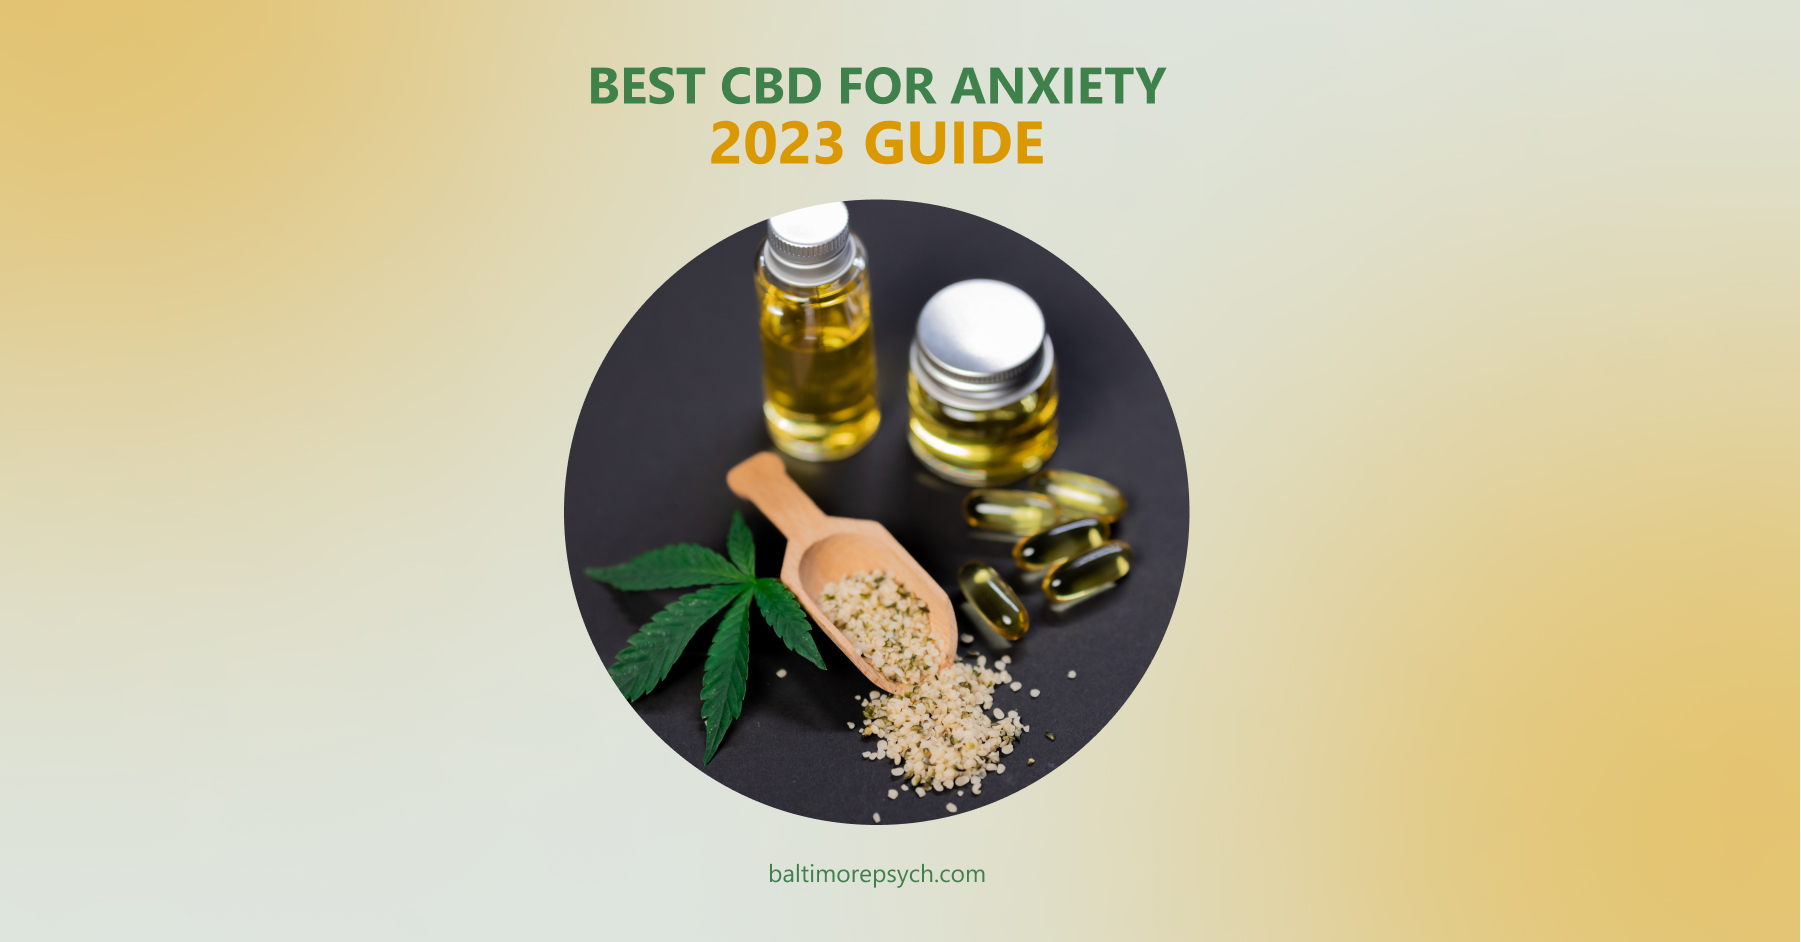 Best CBD for anxiety: 2023 Guide